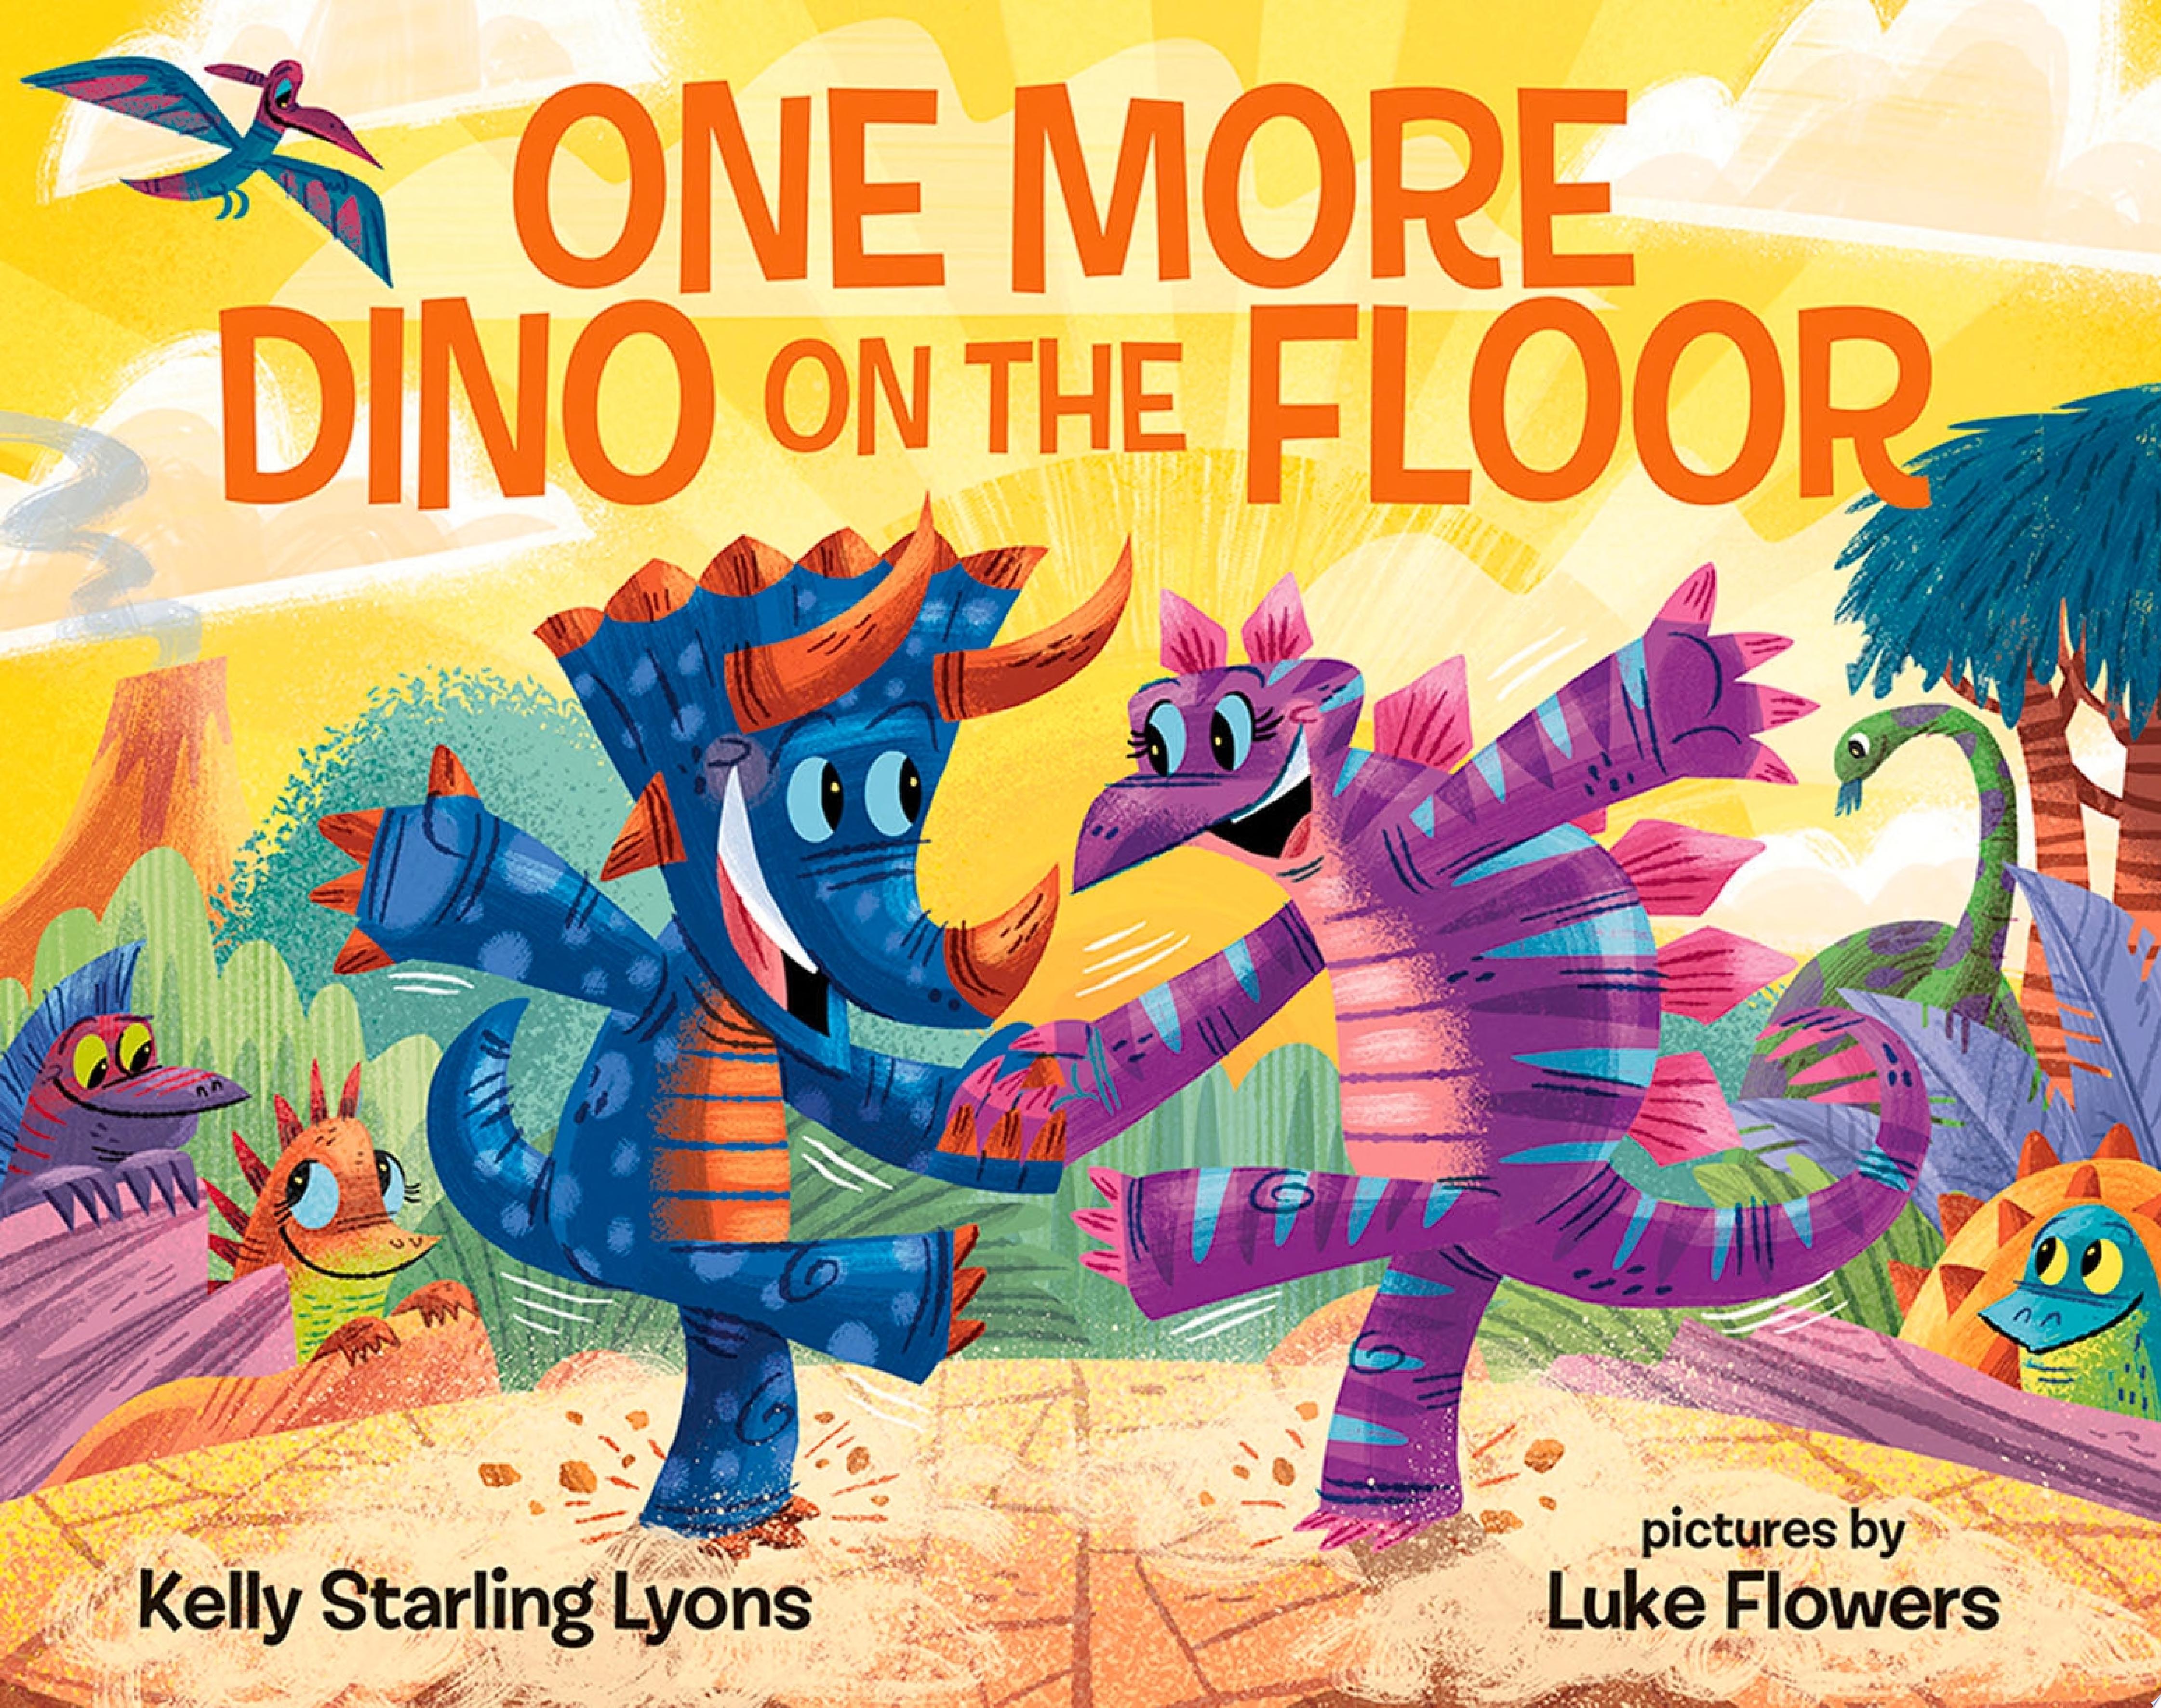 Image for "One More Dino on the Floor"